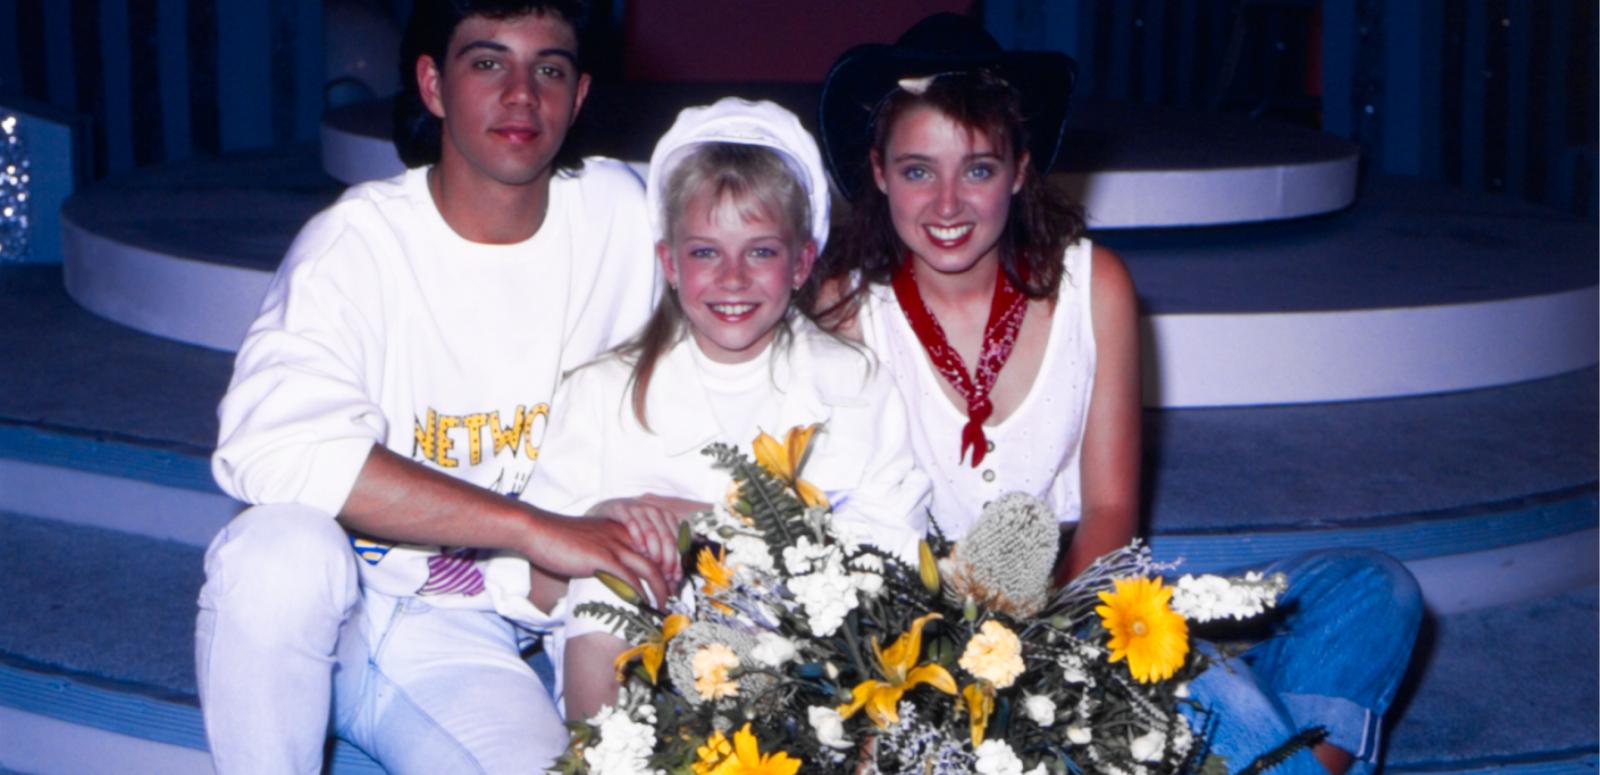 Young Talent Team members Vince Deltito, Rikki Arnot and Dannii Minogue sit together. Rikki, sitting in-between the two older teens, is holding a bunch of flowers.